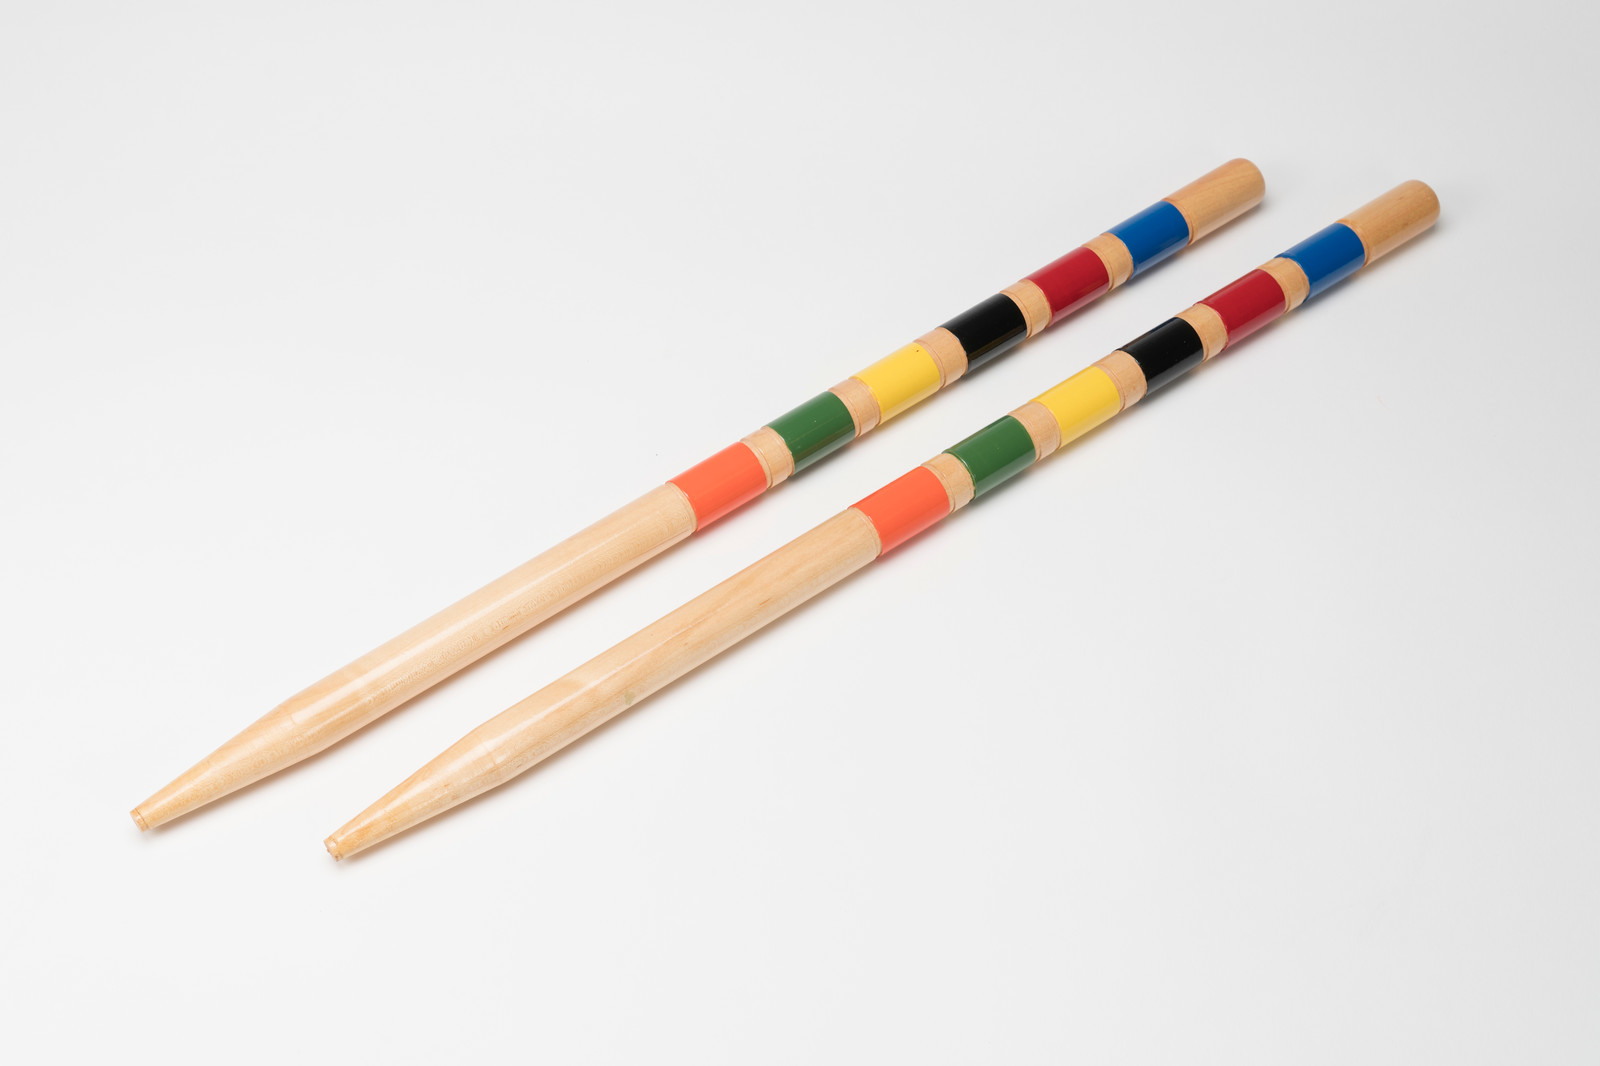 CRQ 530 Croquet Stake: CRQ Amish Made Classic, 9 Wicket, 6 Color, 24 inch, 2 Piece Set